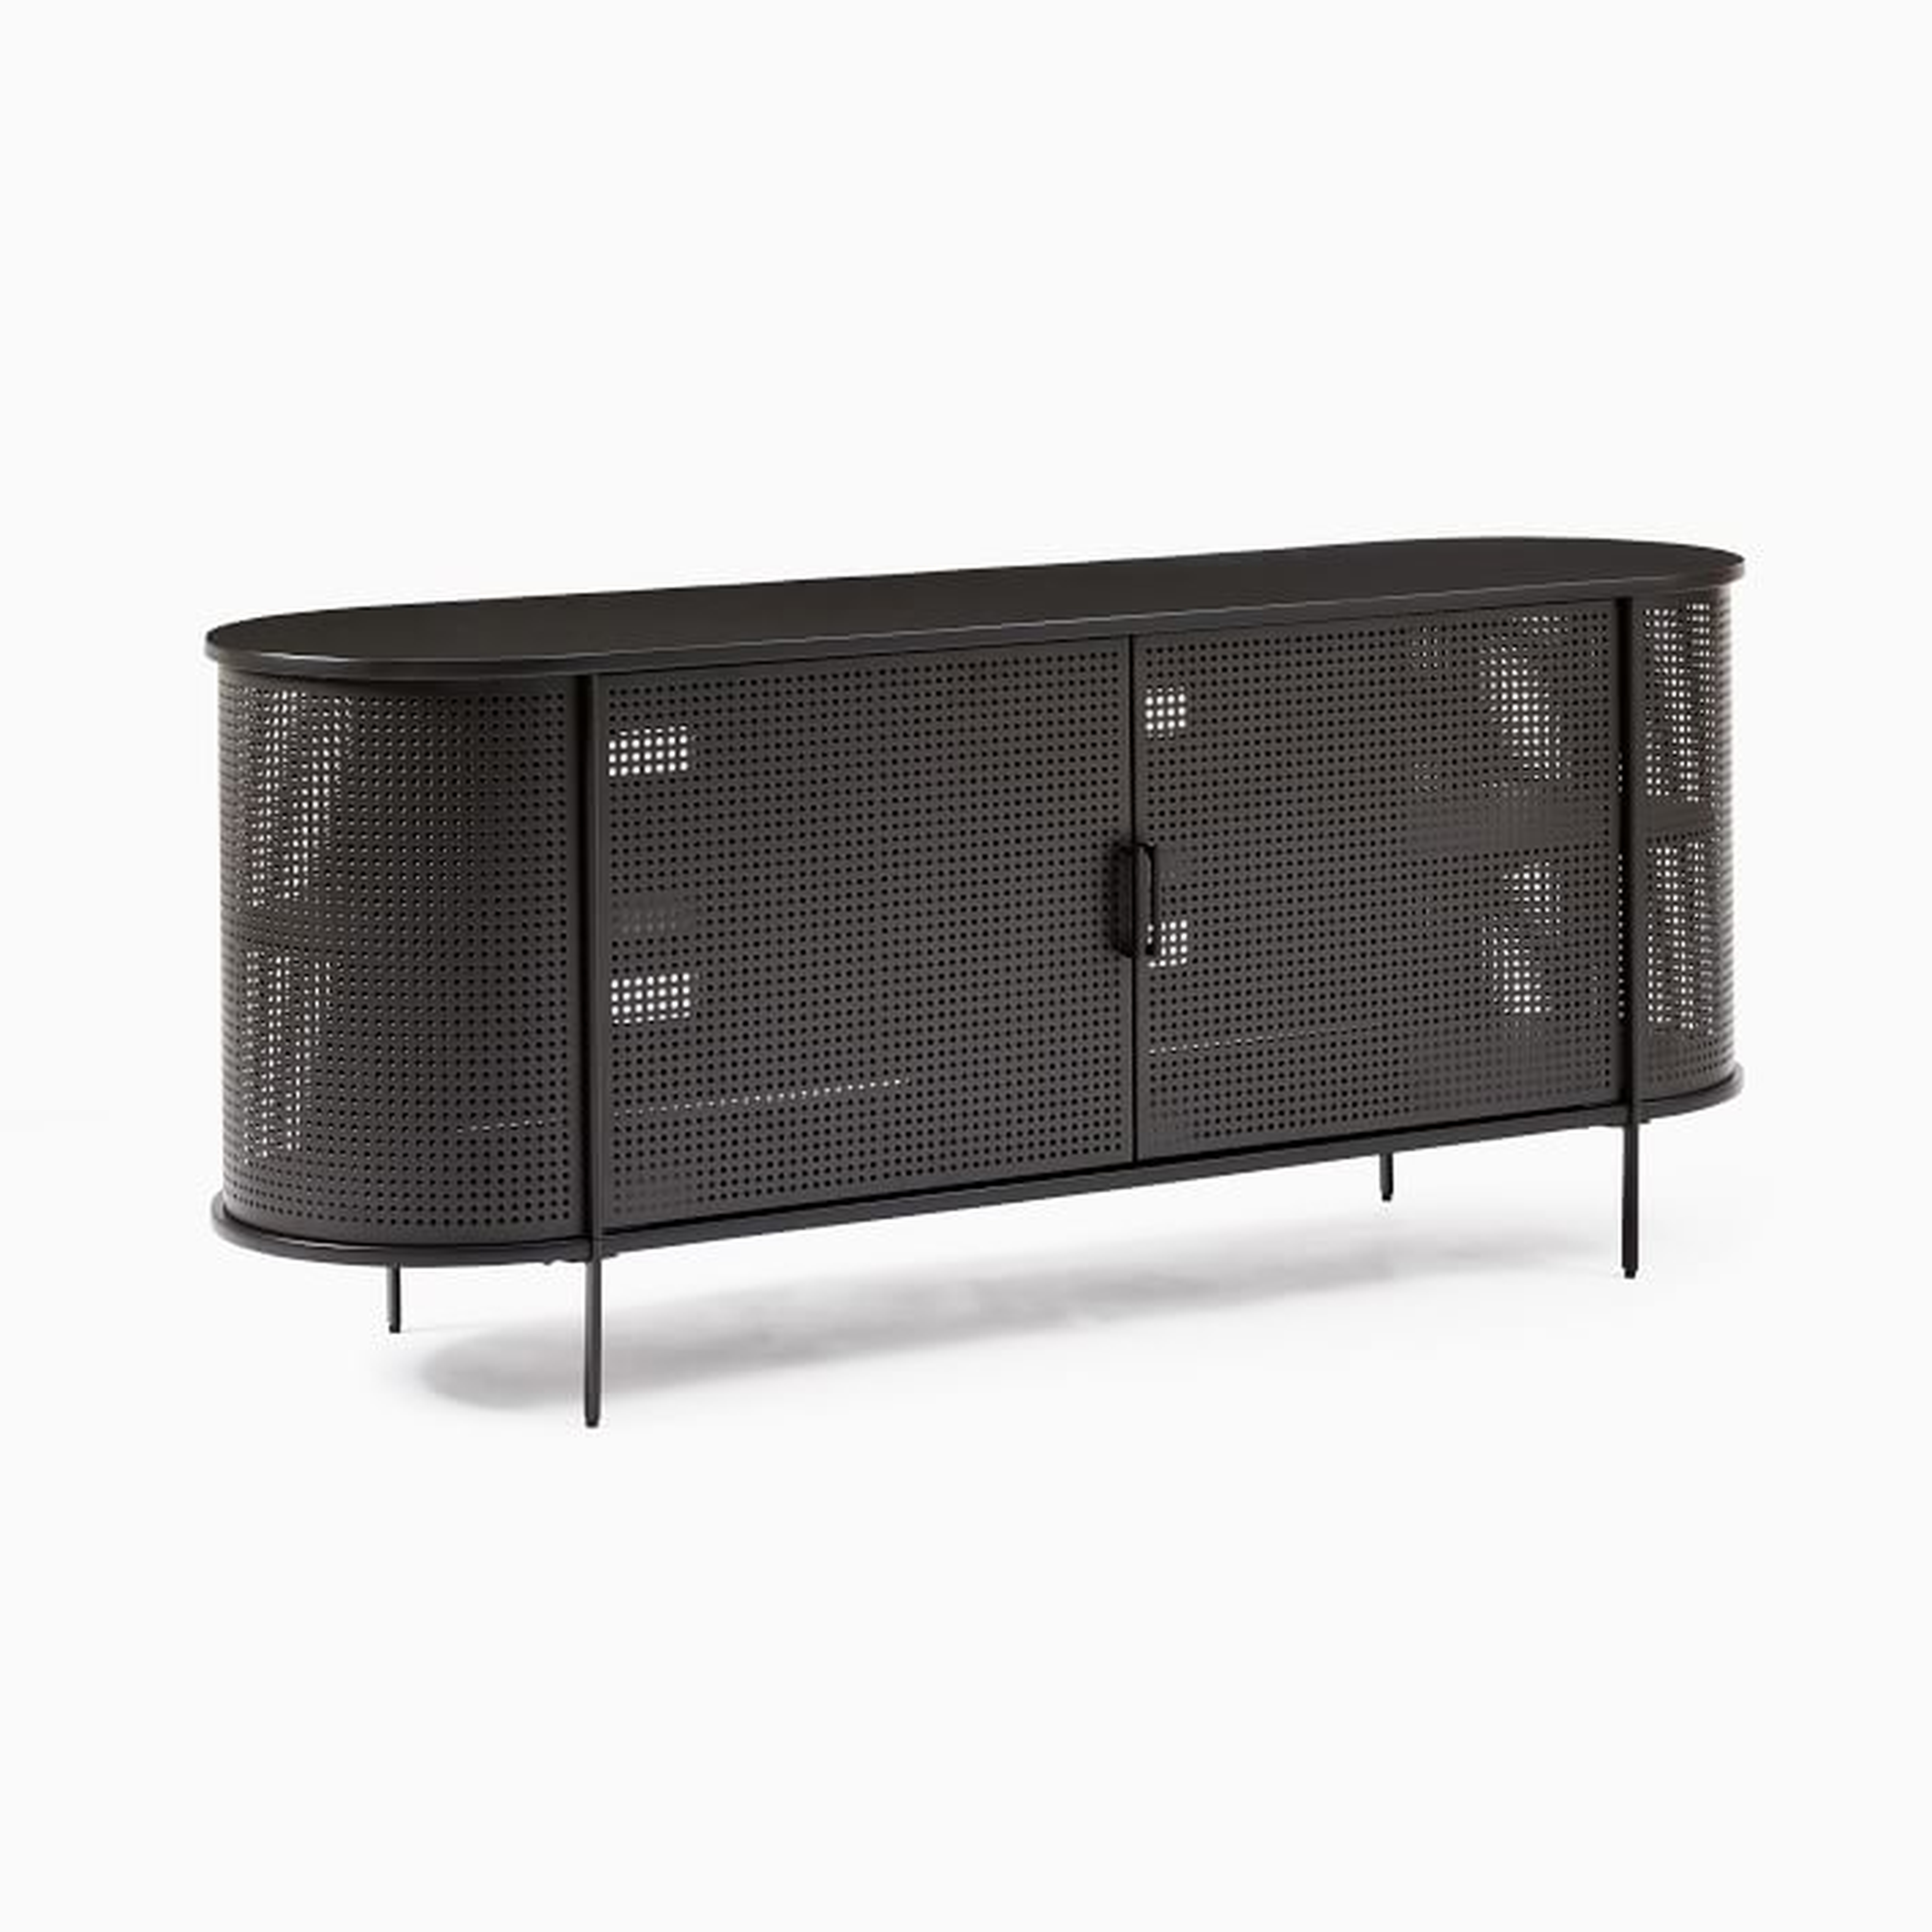 Perforated Metal Media Console - West Elm